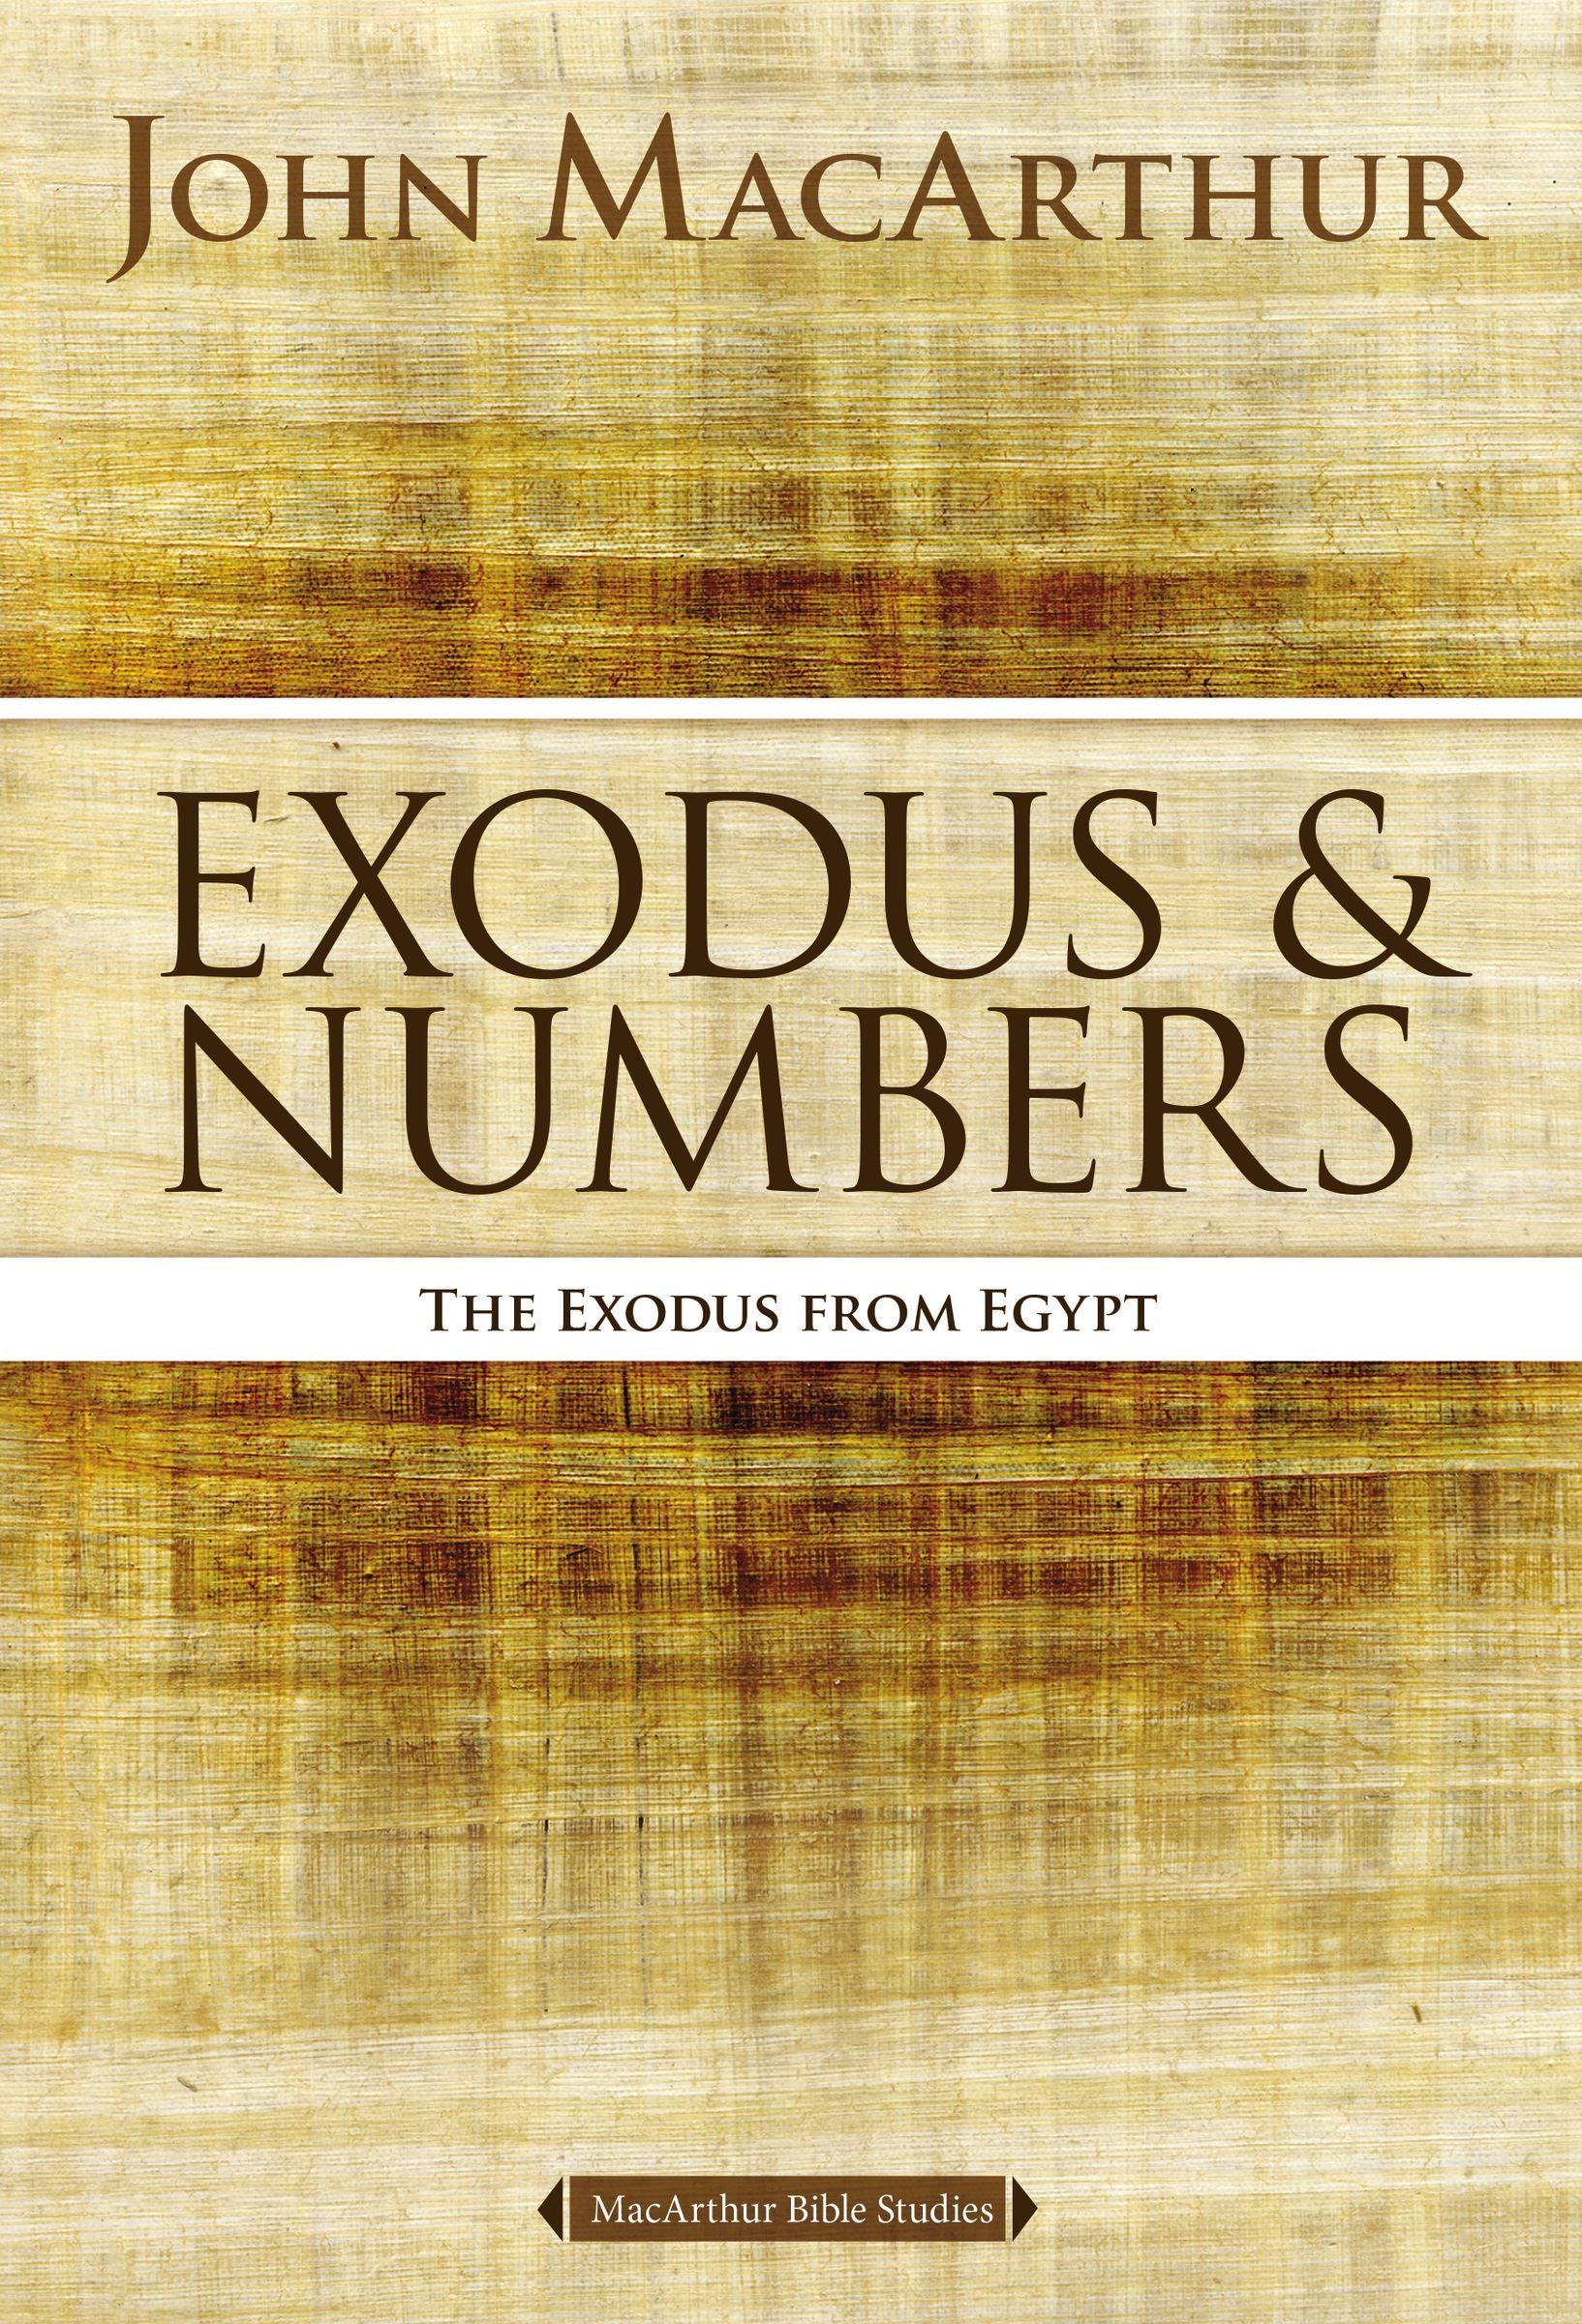 Image of Exodus and Numbers other